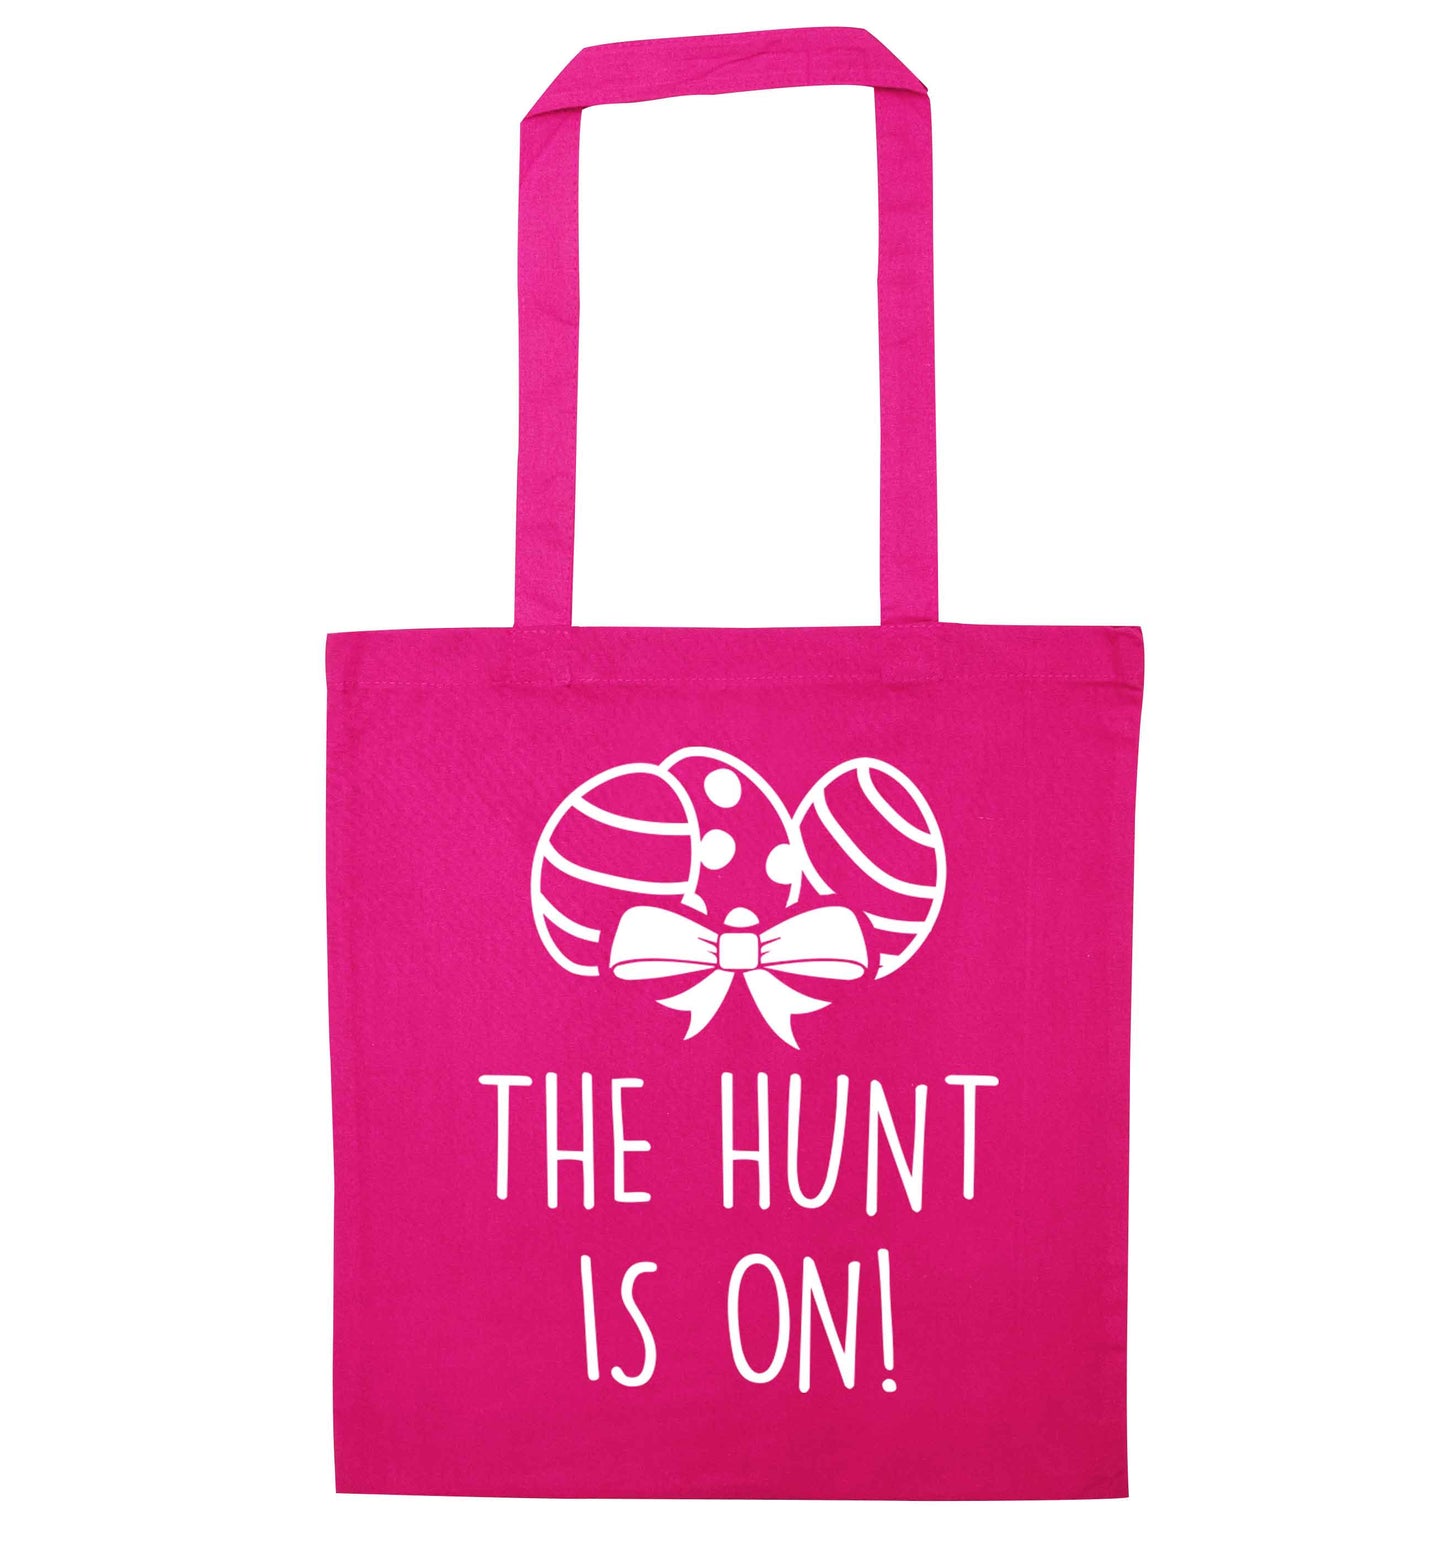 The hunt is on pink tote bag